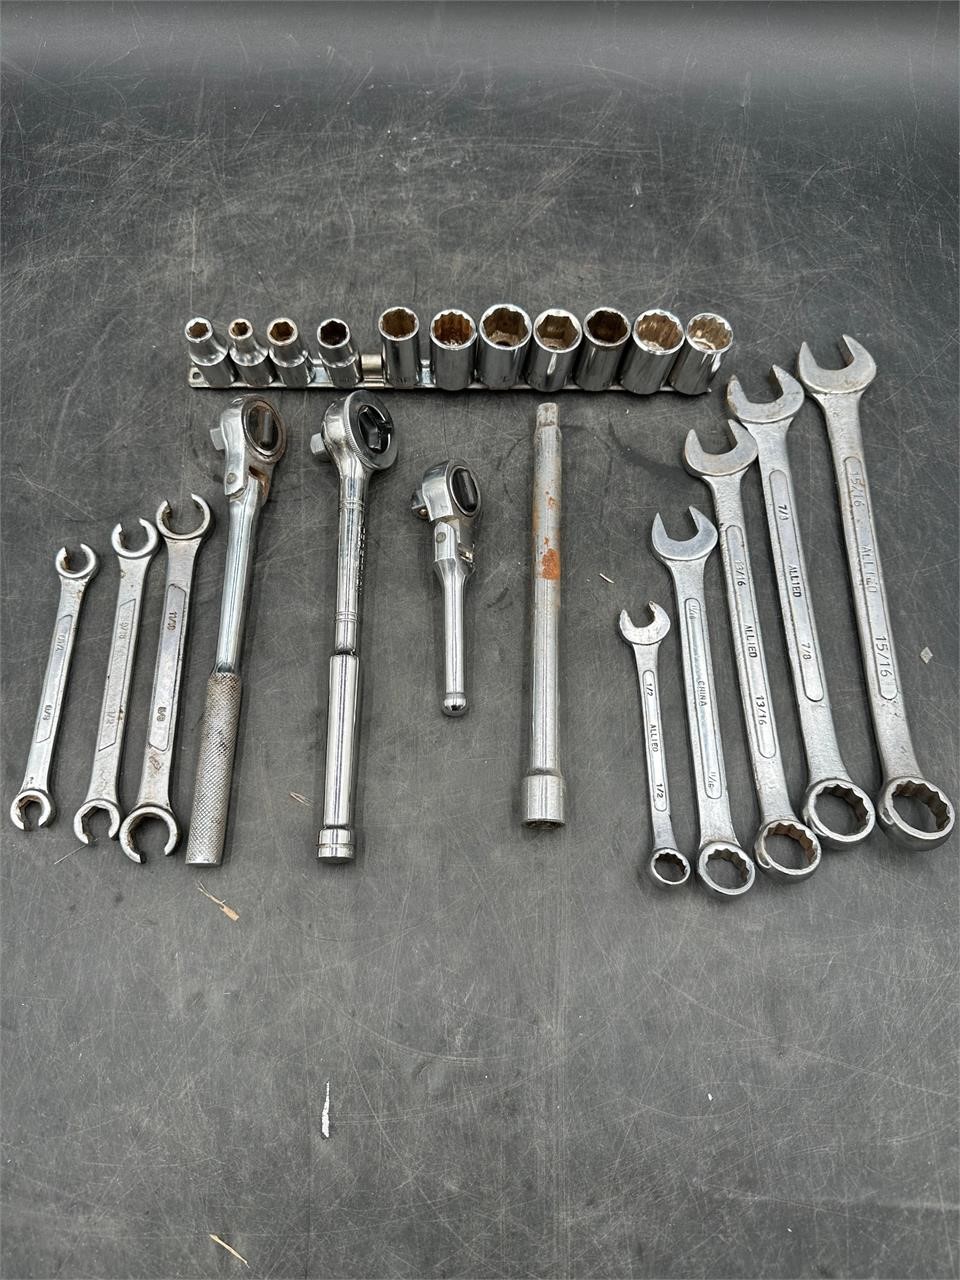 1/2" Sockets, Ratches, Wrenches